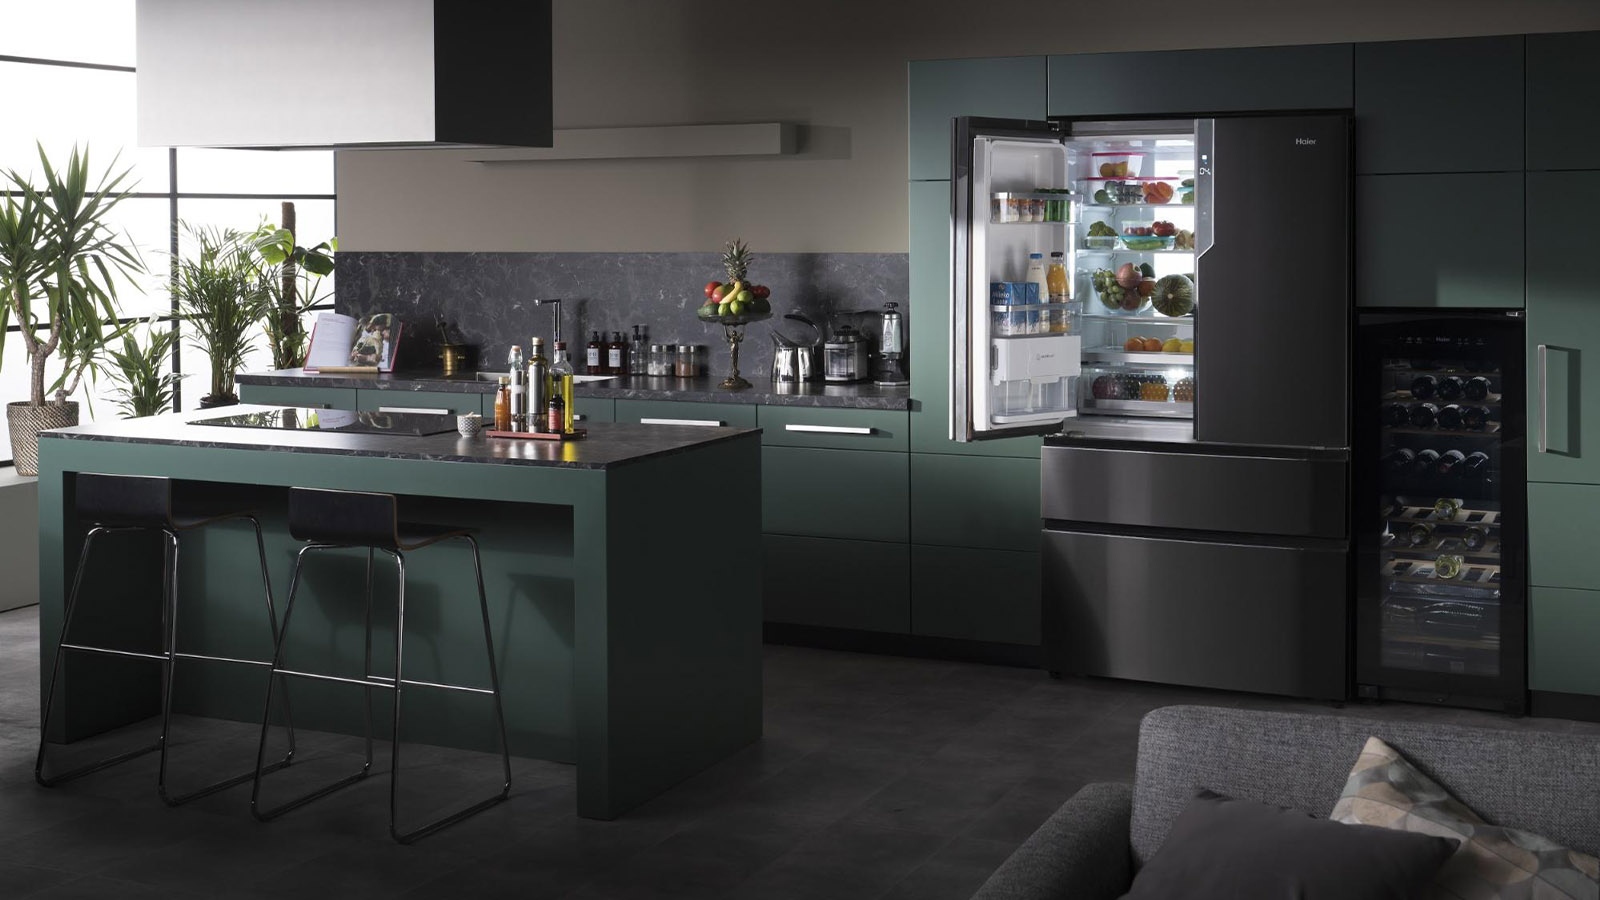 Kitchen appliances for every occasion - Part 1